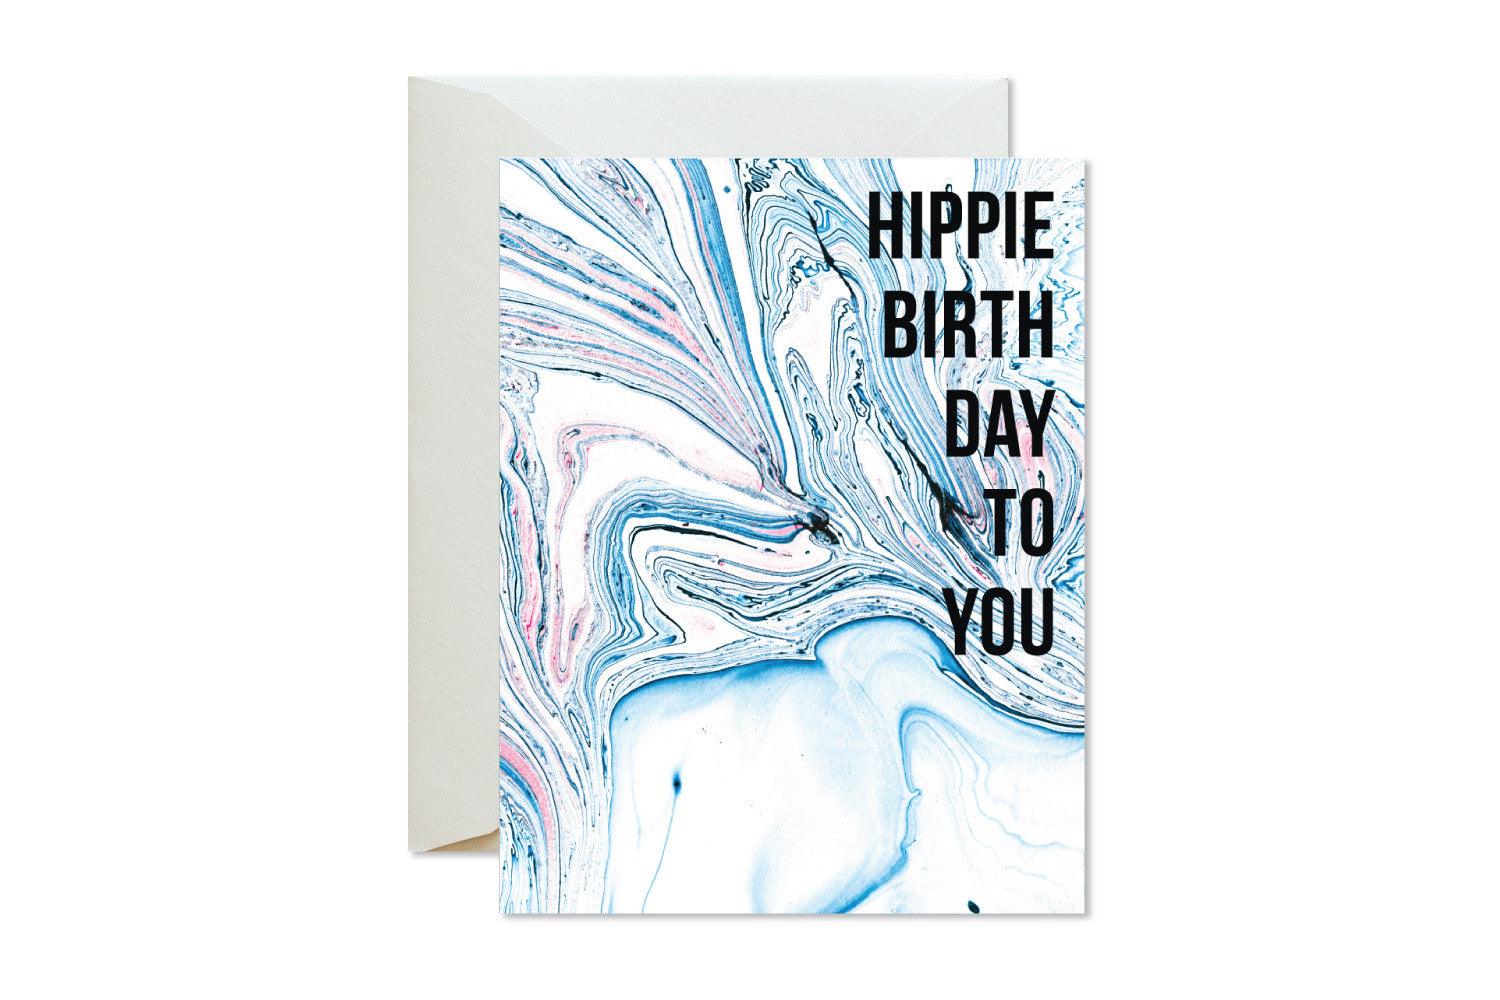 Bohemian HIPPIE BIRTHDAY Greeting Card Marble by pixelimpress